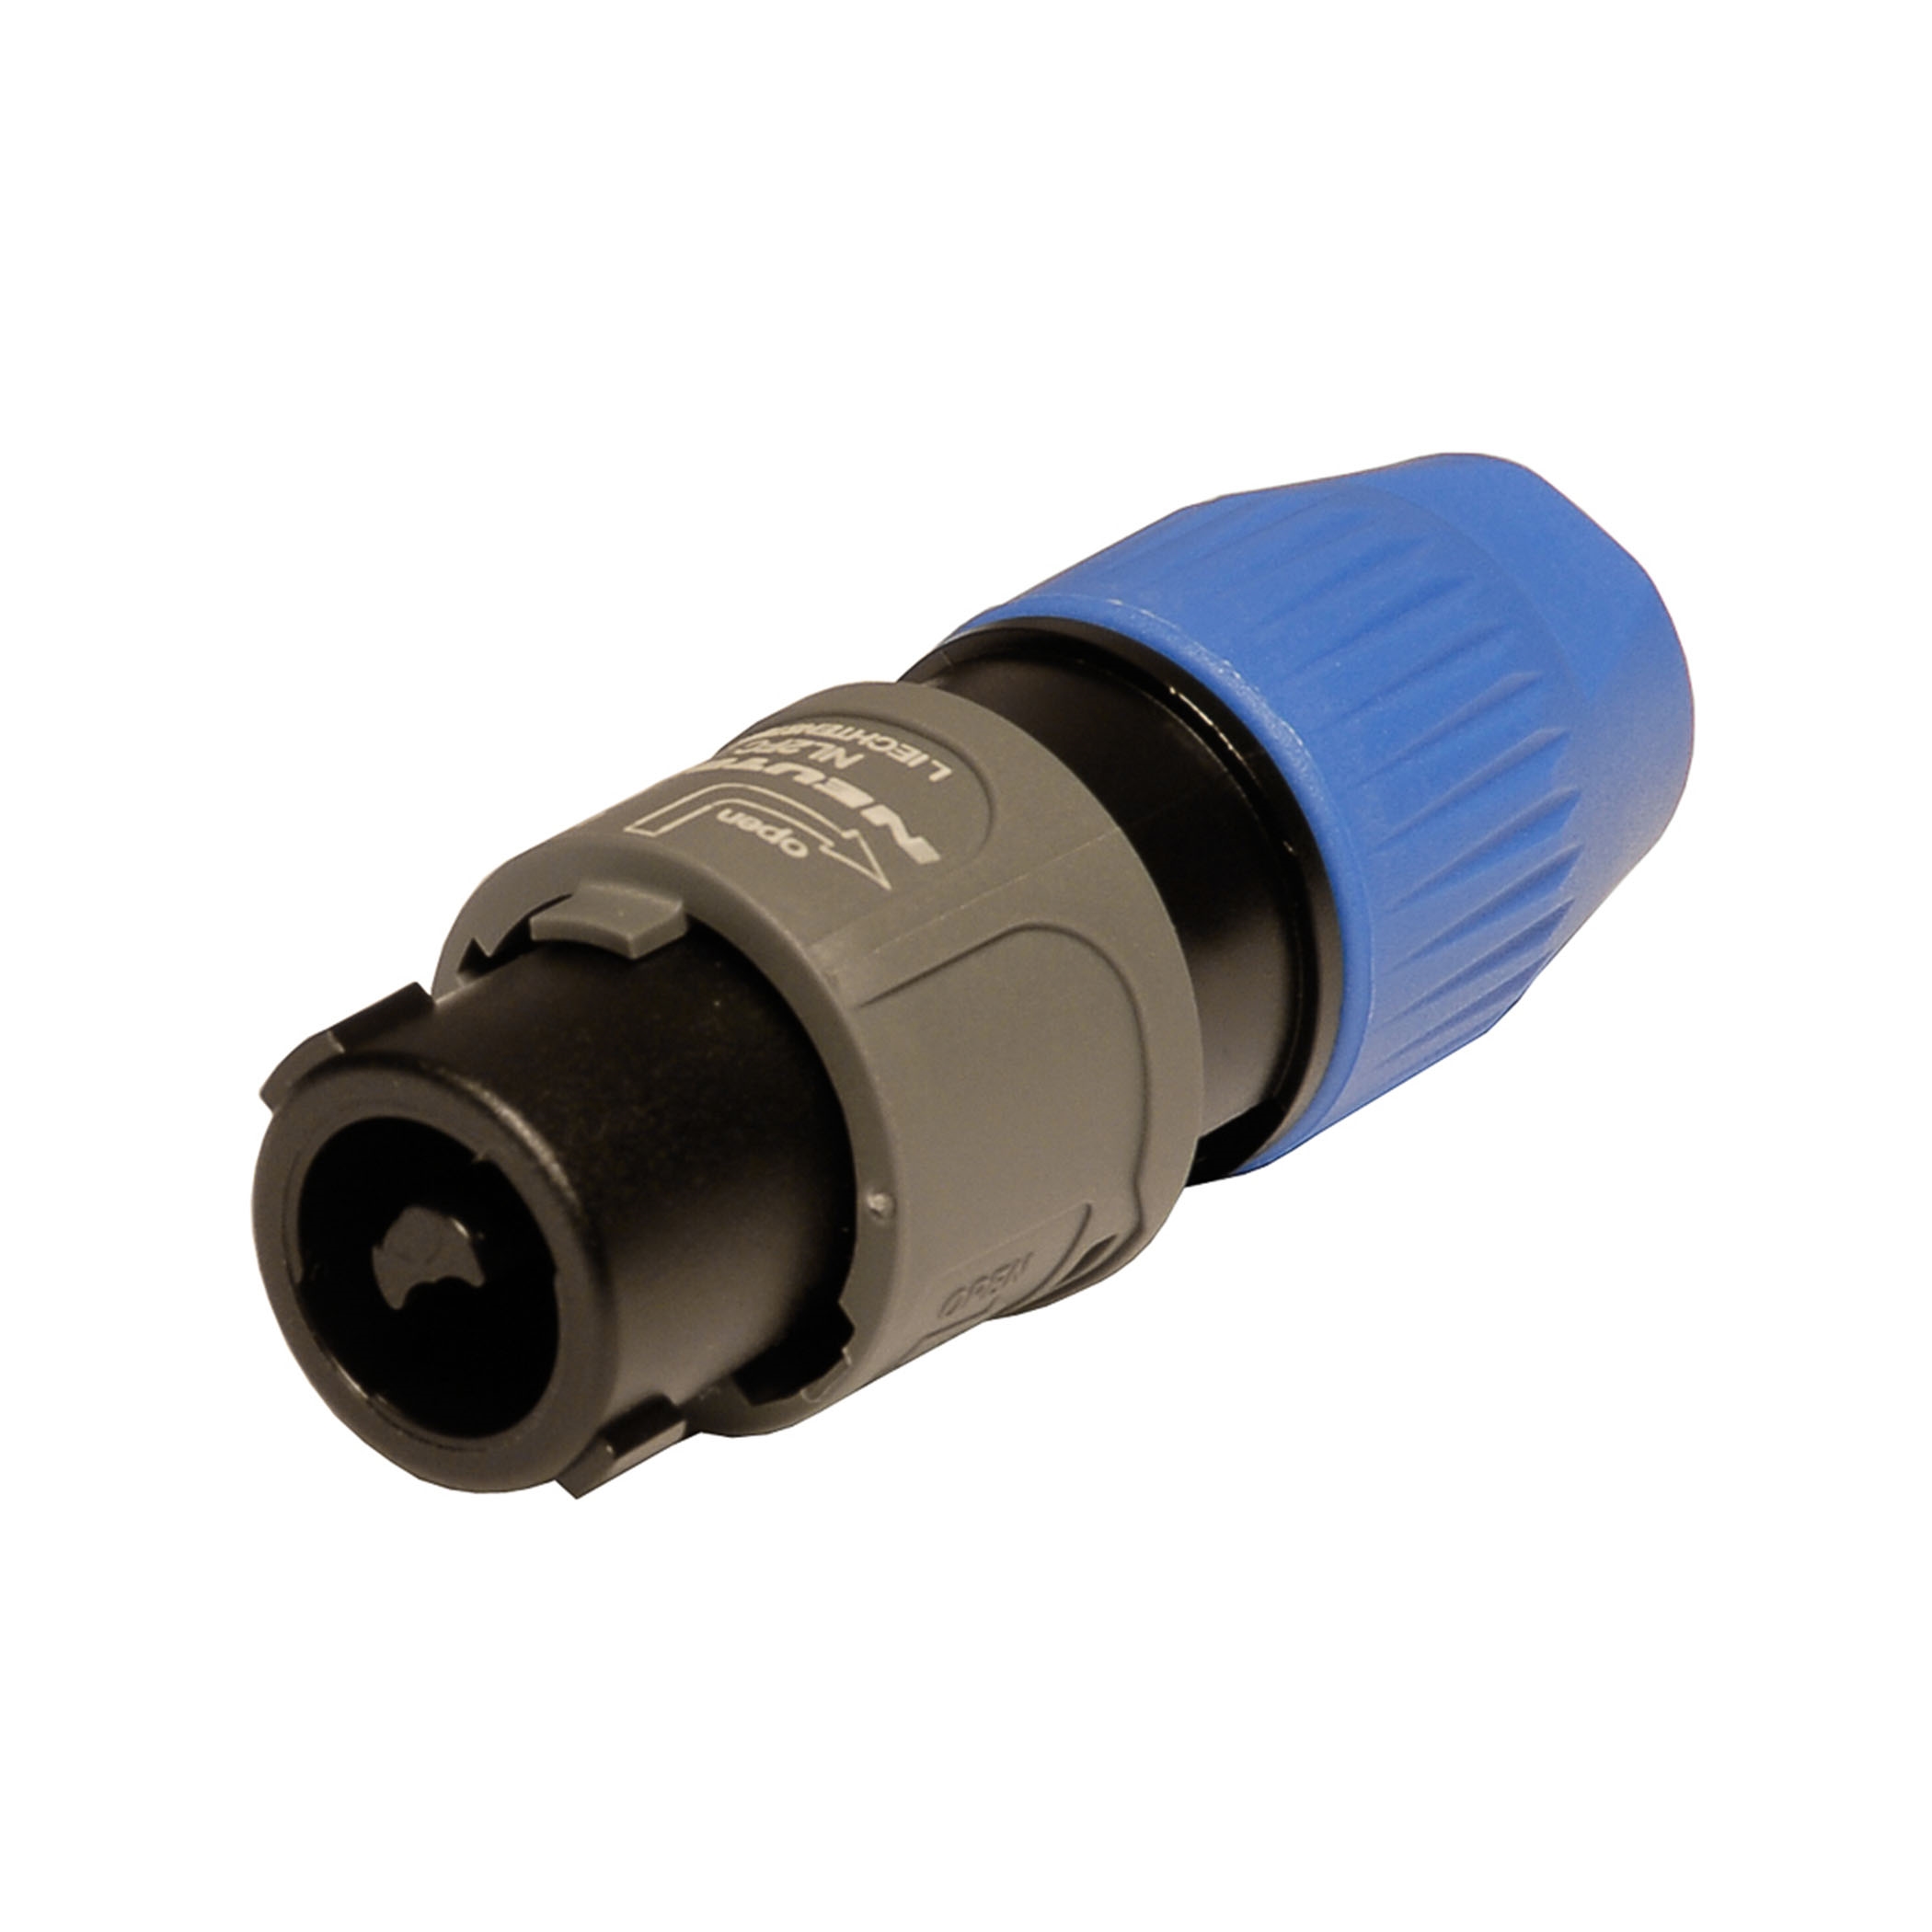 SpeakON Cable 8 pin - vn-nl8fch